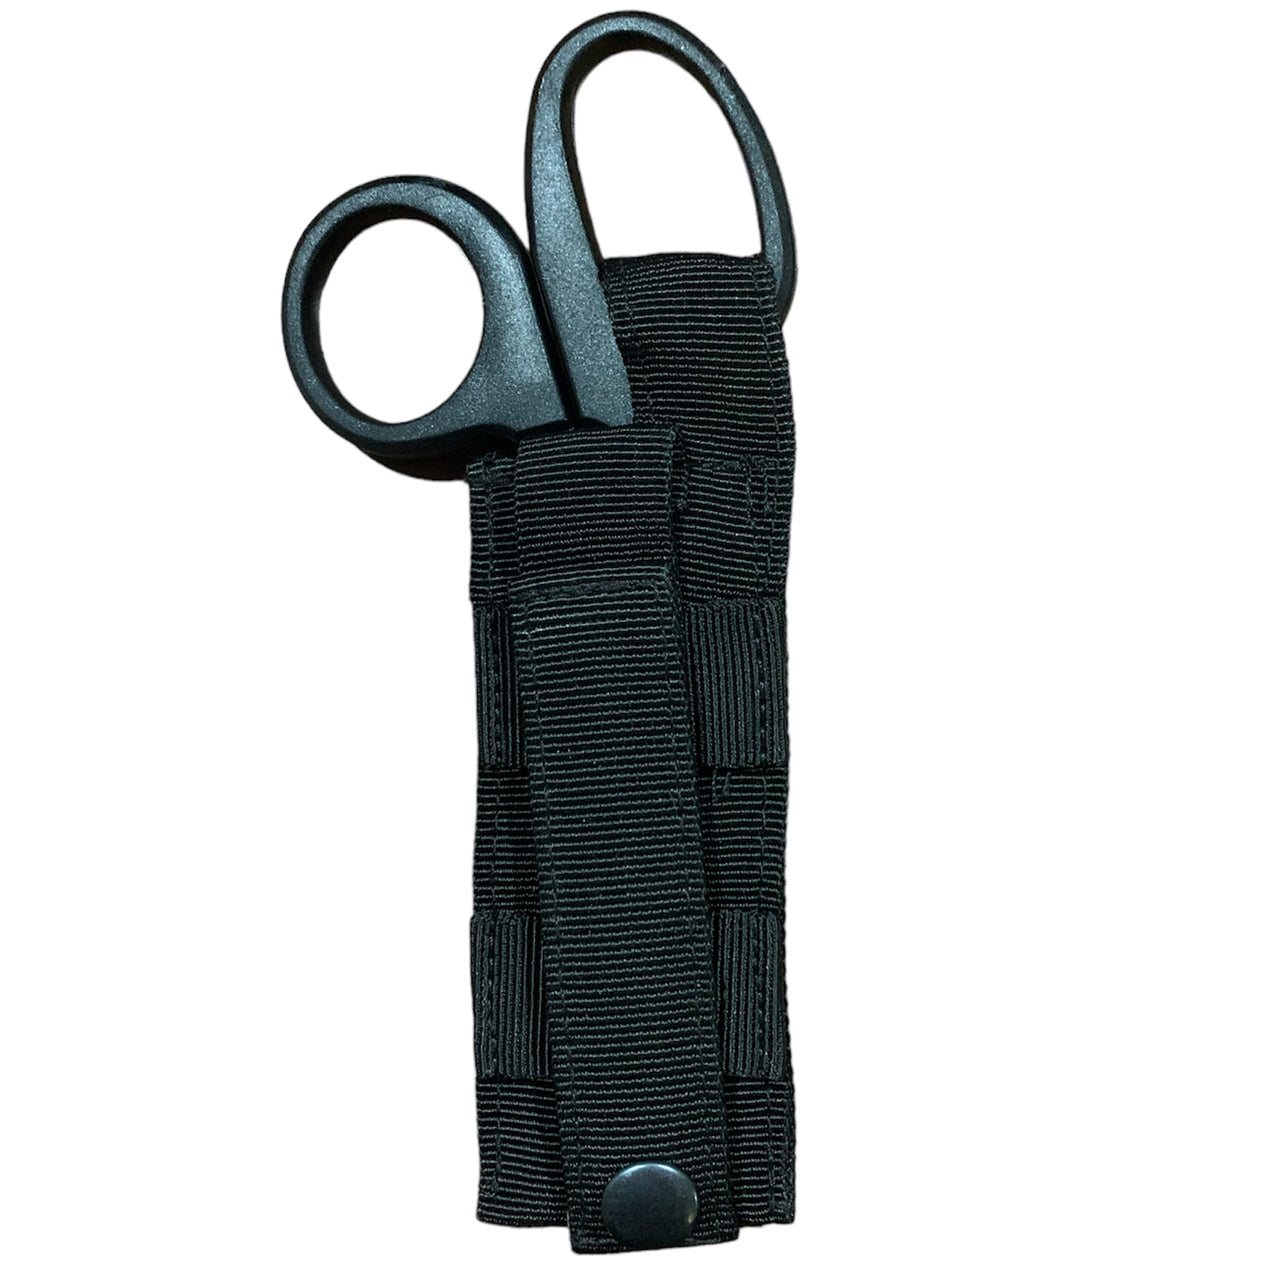 This locally made pouch is designed for police tactical vests and offers a sleek, lightweight, and effective solution. It features a padded sleeve for a single pair of medium sized trauma shears, with an easy access button clip system that can be operated with one hand. The pouch only requires one MOLLE column for attachment, ensuring quick and convenient access to vital tools when every second counts. www.defenceqstore.com.au